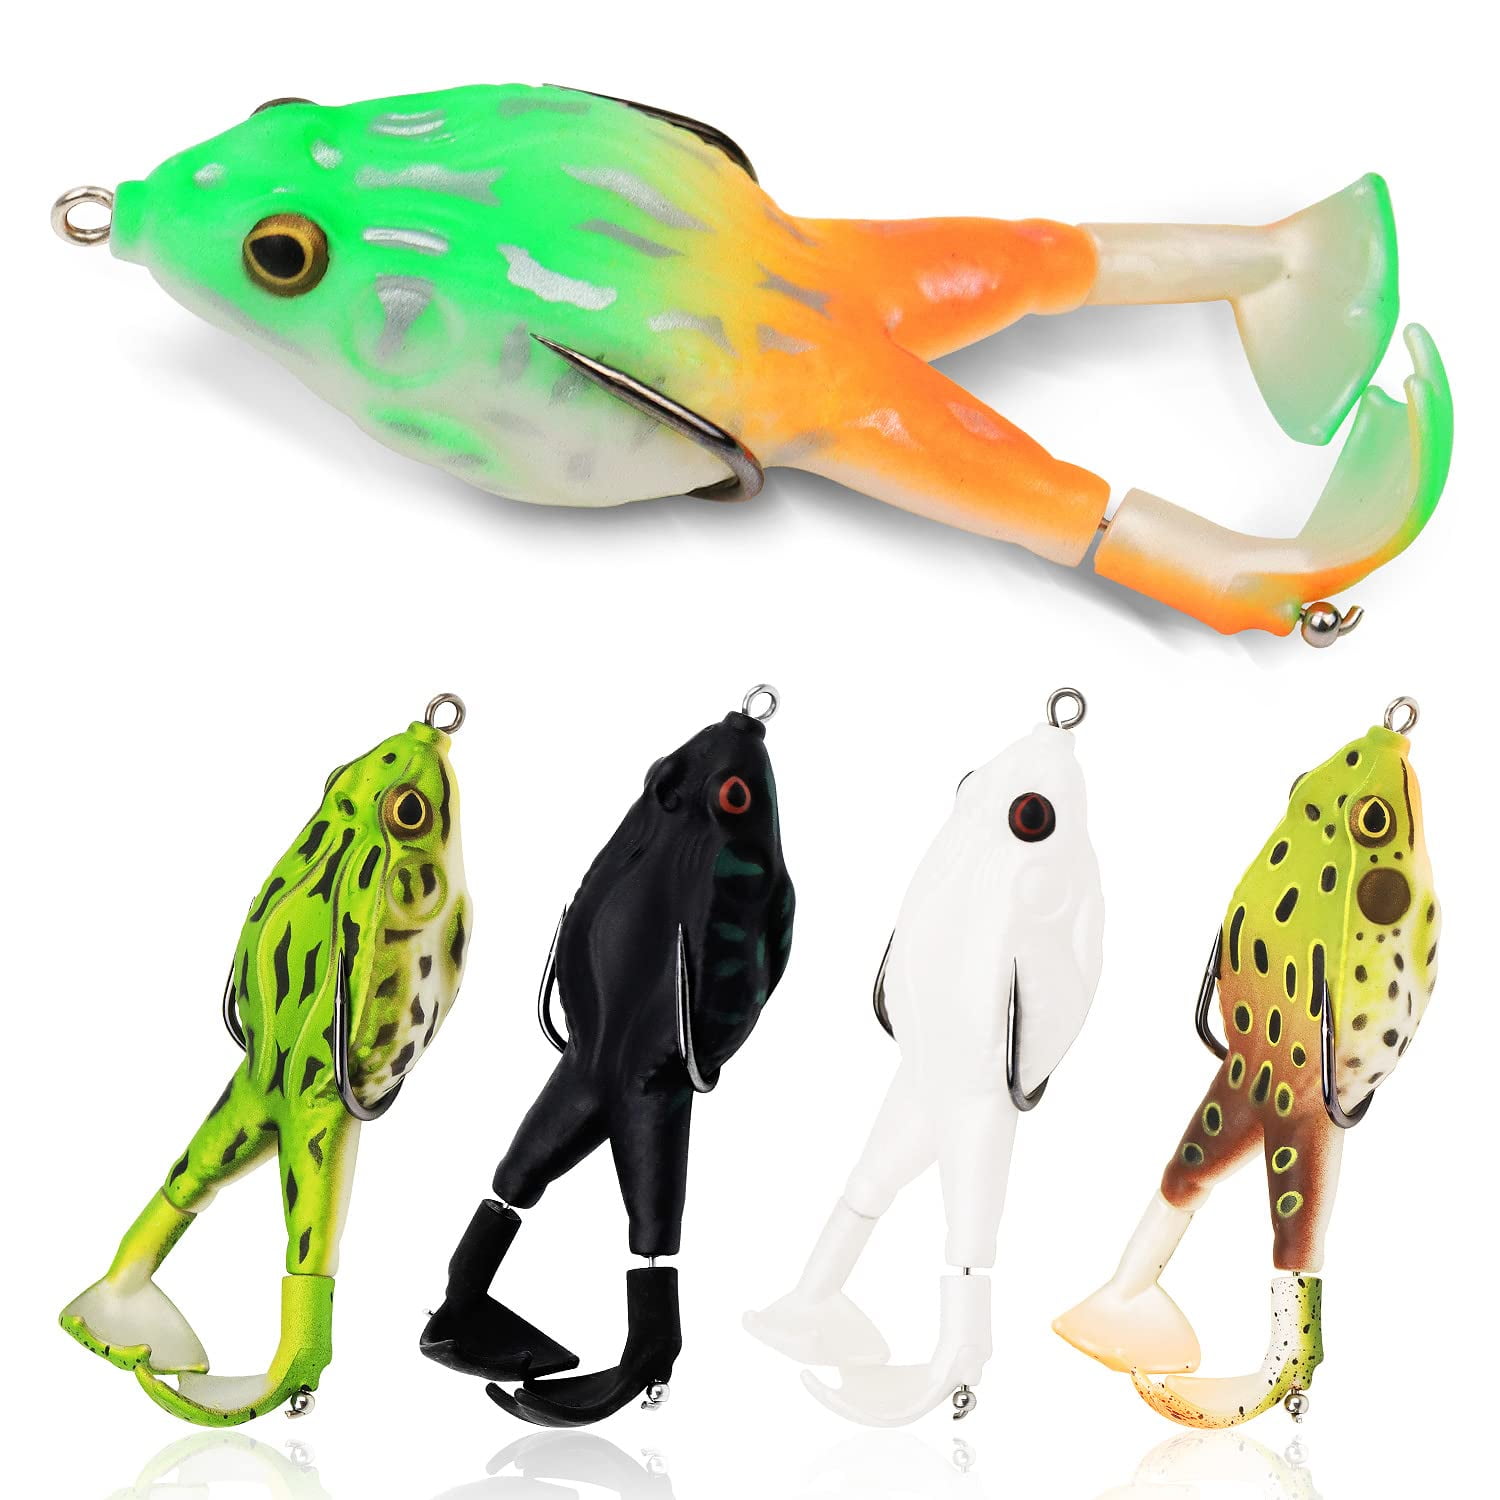 Soft Frog Bait, Double Propellers Legs, 3D Eyes, Lifelike Silicone